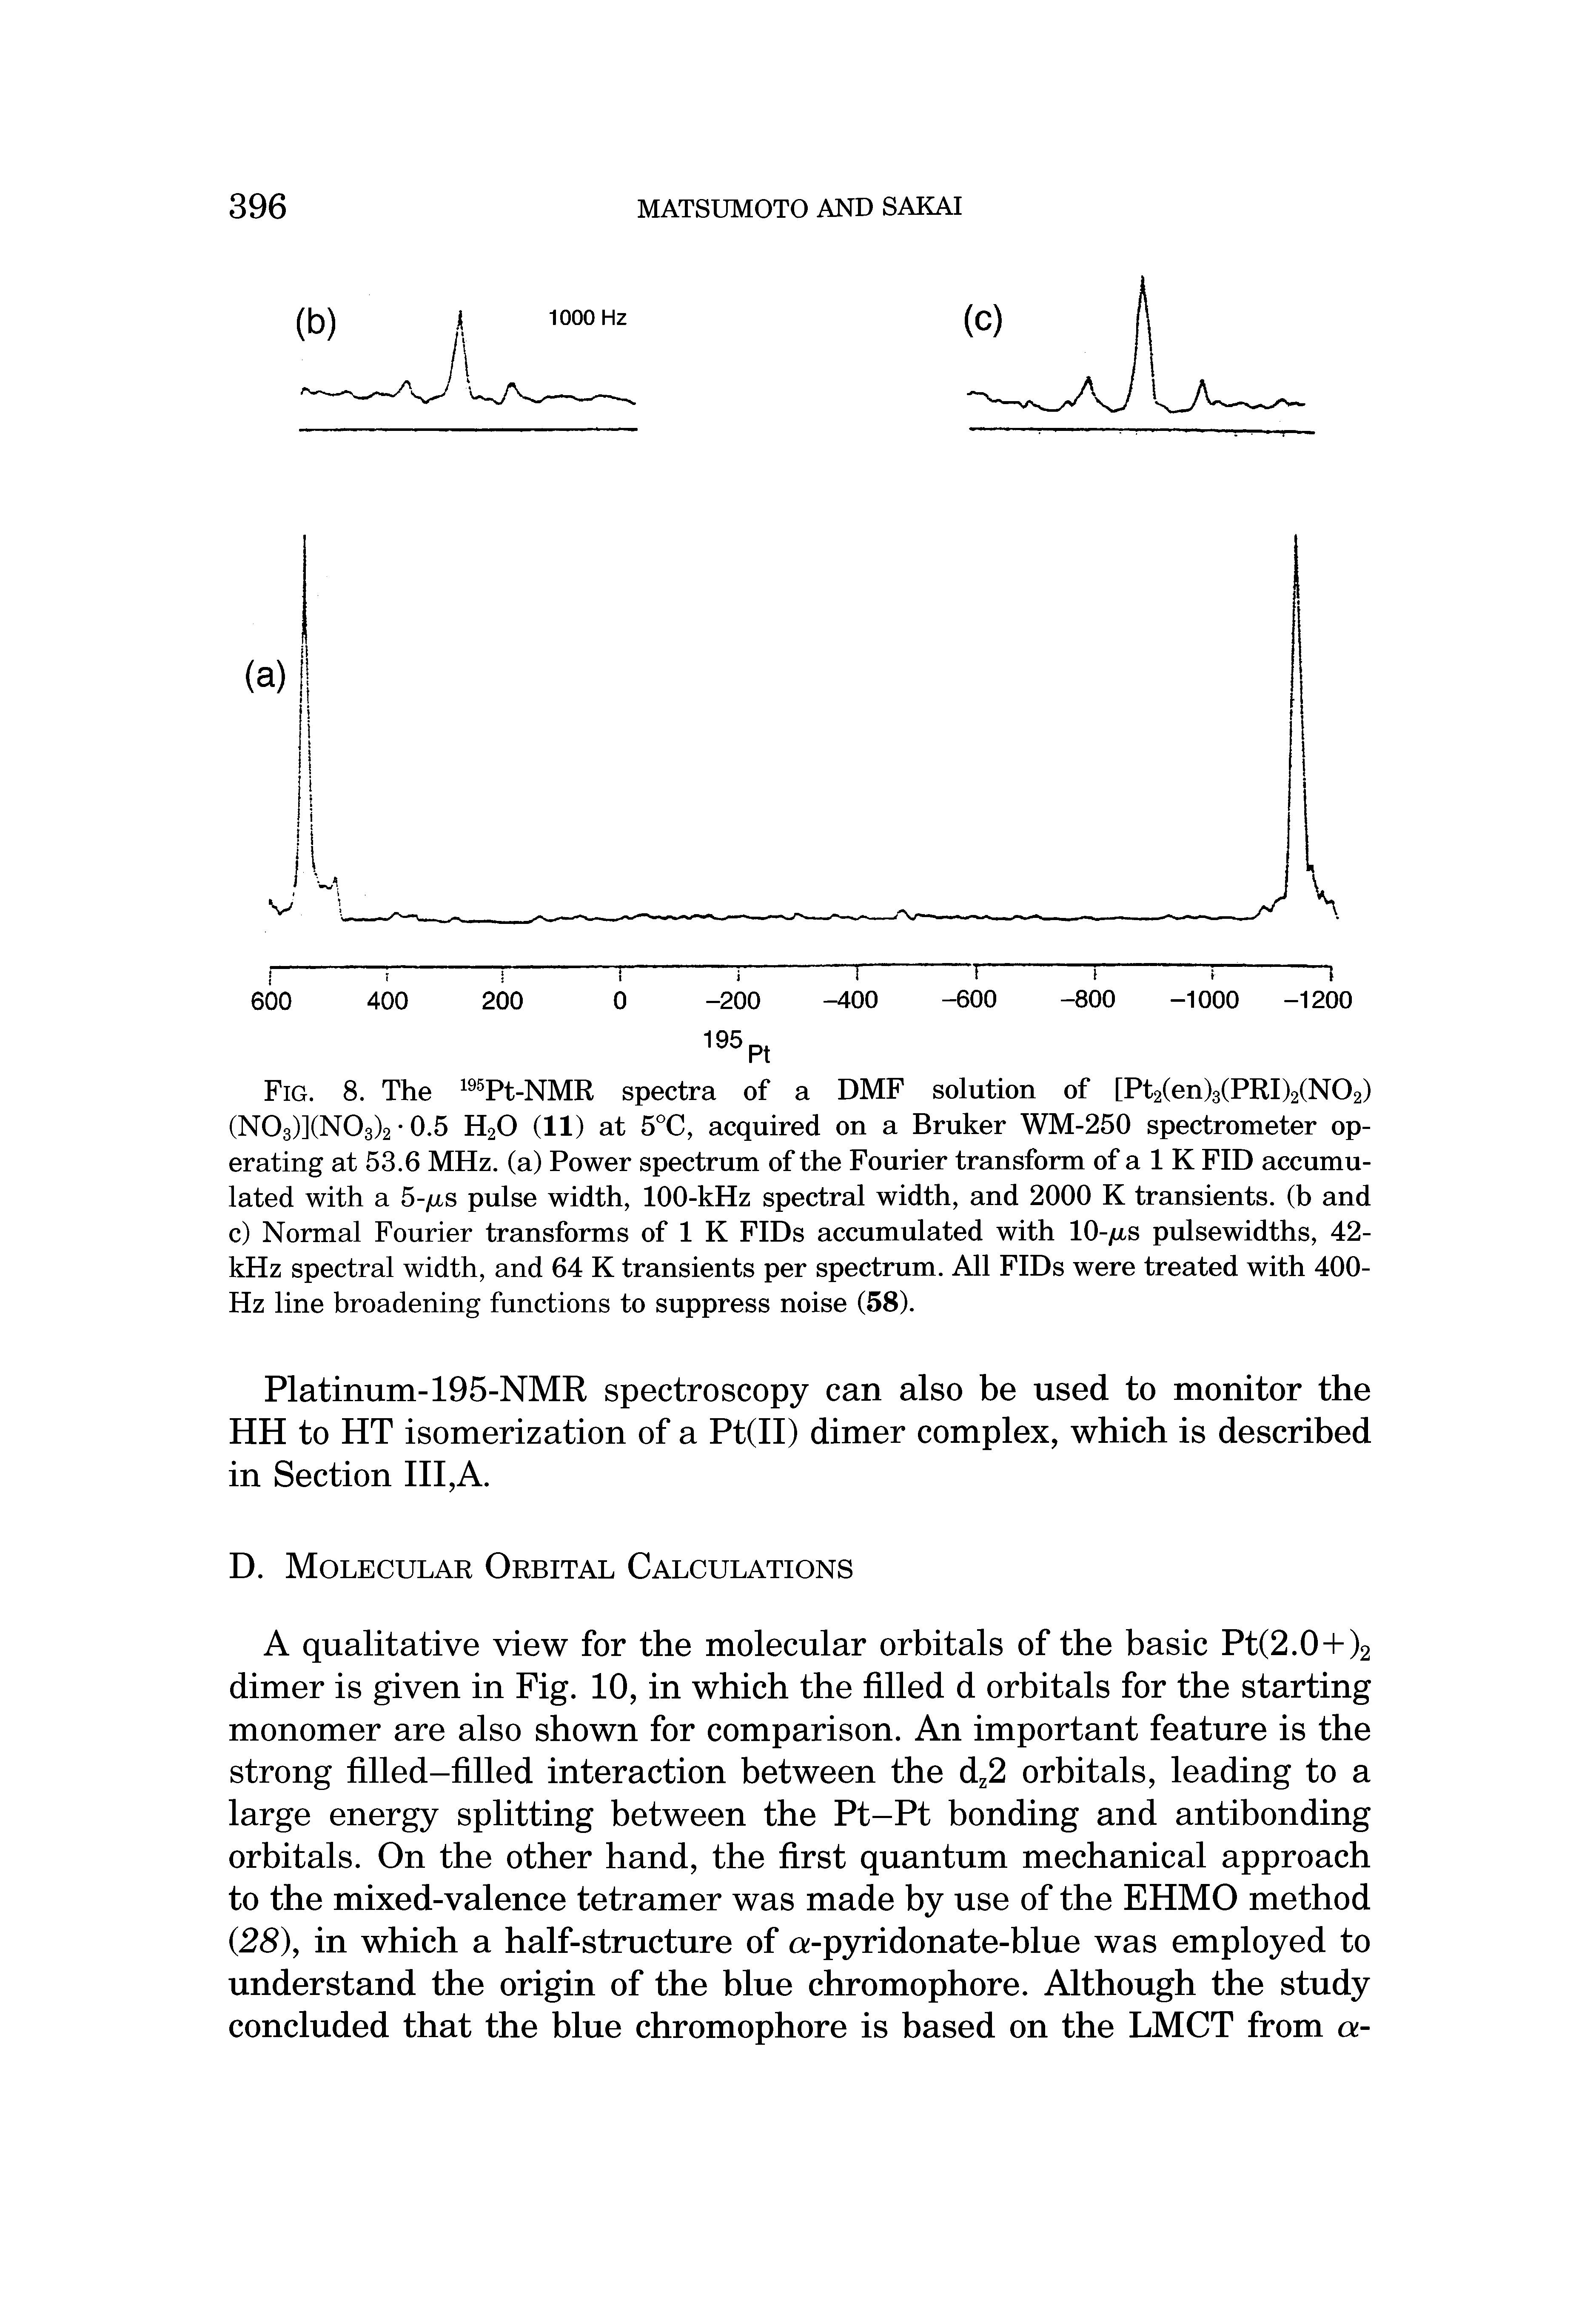 Fig. 8. The 195Pt-NMR spectra of a DMF solution of [Pt2(en)3(PRI)2(N02) (N03)](N03)2 0.5 H20 (11) at 5°C, acquired on a Bruker WM-250 spectrometer operating at 53.6 MHz. (a) Power spectrum of the Fourier transform of a 1 K FID accumulated with a 5-jjls pulse width, 100-kHz spectral width, and 2000 K transients, (b and c) Normal Fourier transforms of 1 K FIDs accumulated with 10-fis pulsewidths, 42-kHz spectral width, and 64 K transients per spectrum. All FIDs were treated with 400-Hz line broadening functions to suppress noise (58).